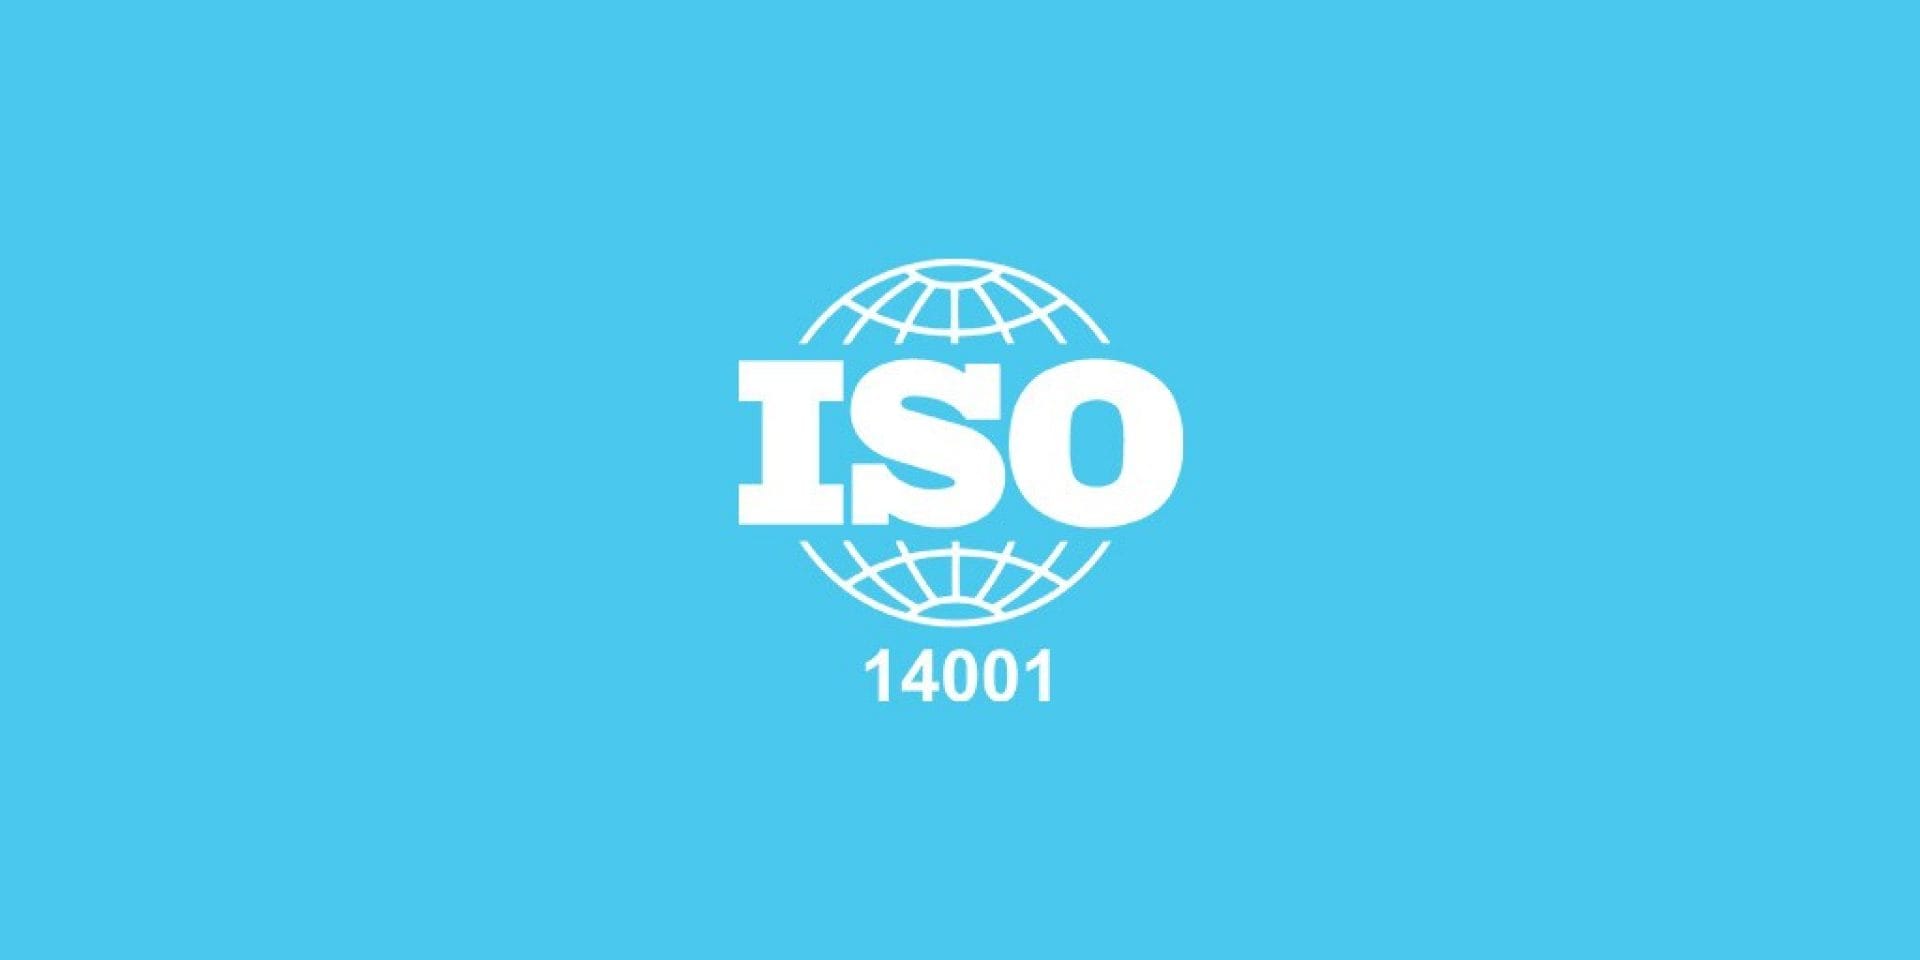 Achieved ISO 14001 Certification